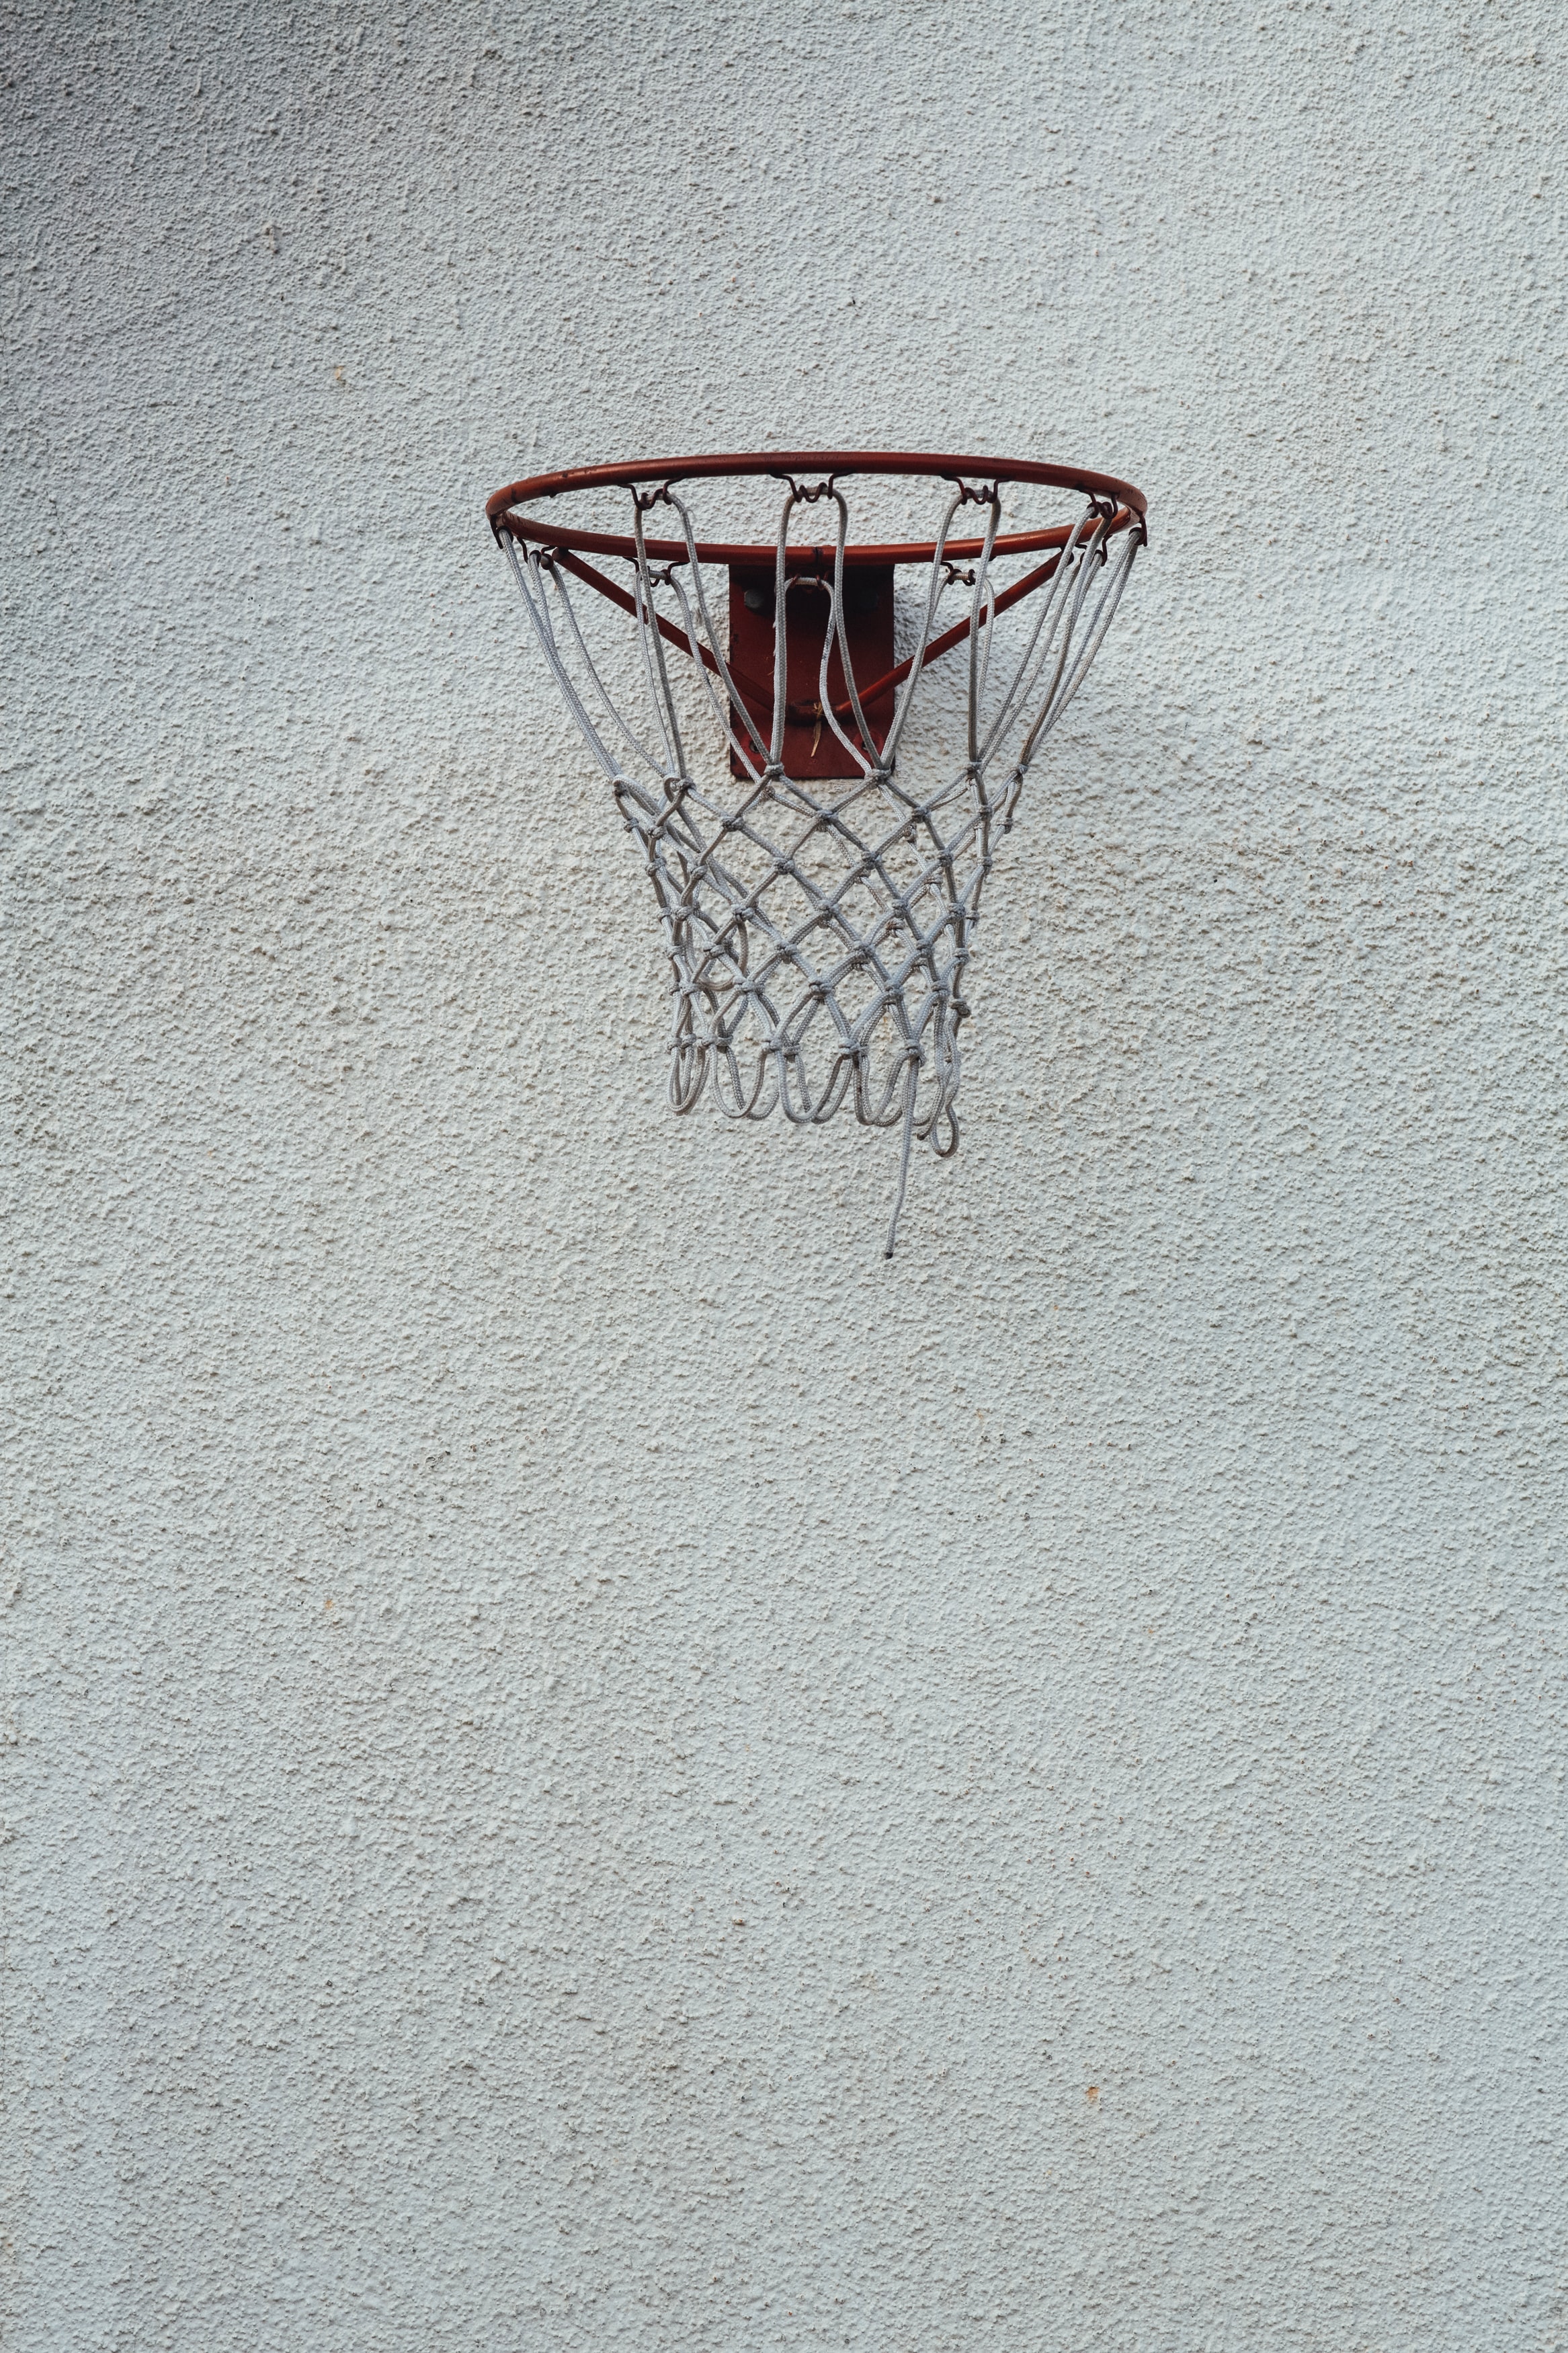 basketball, basketball hoop, basketball ring, miscellanea, miscellaneous, grid, wall lock screen backgrounds